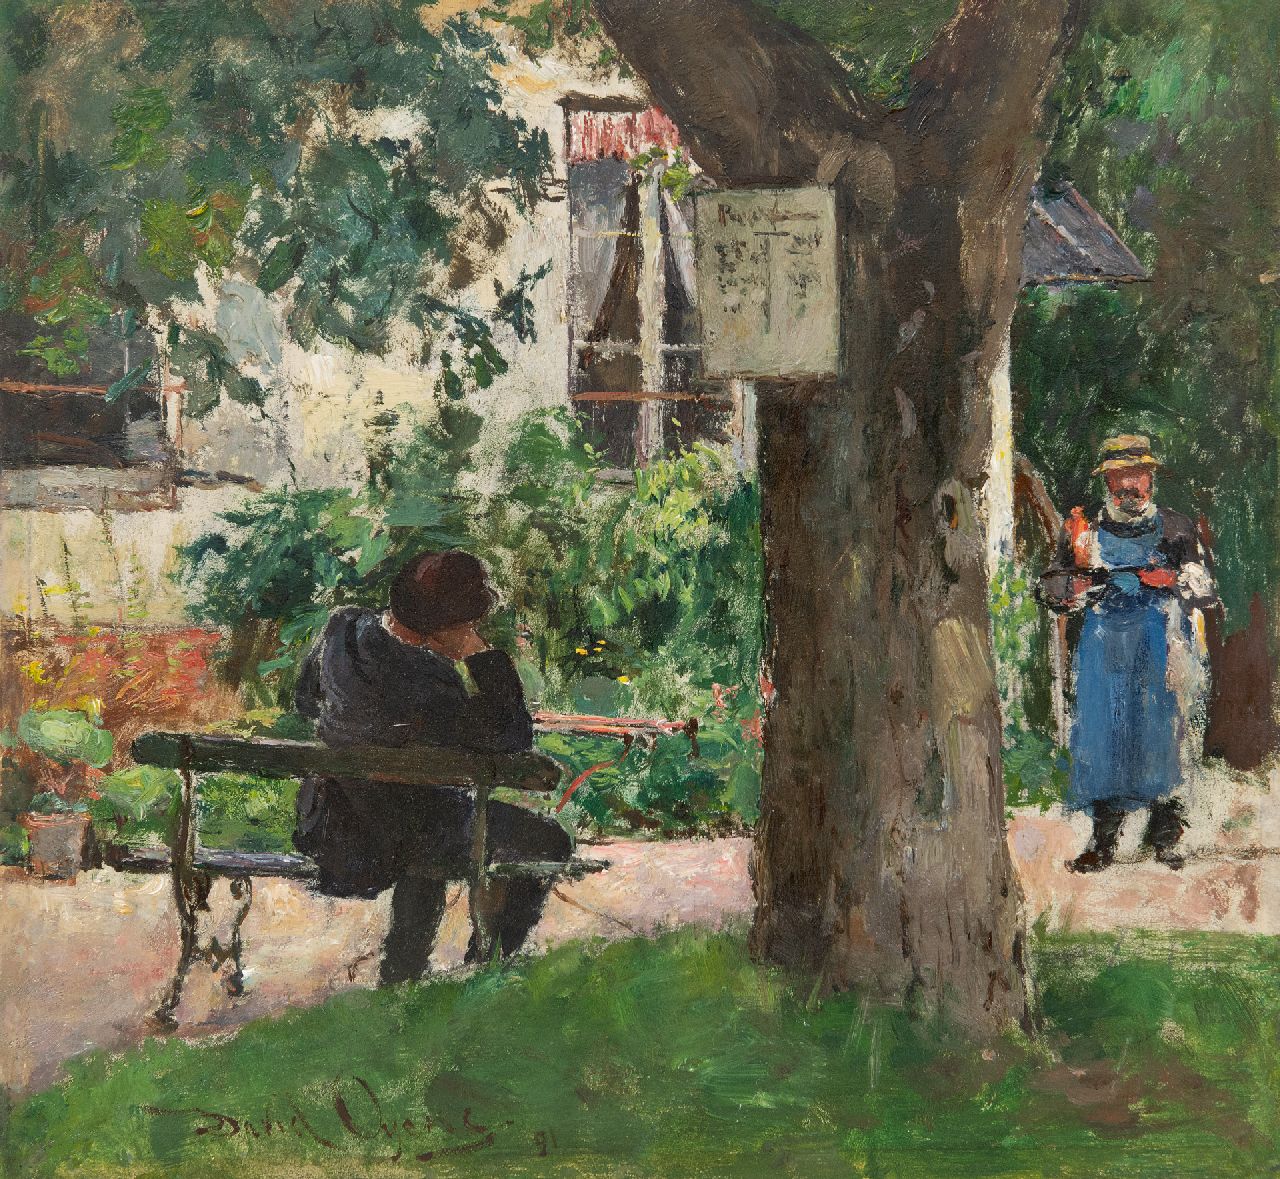 Oyens D.  | David Oyens, Taking a rest at a terrace in a sunny park, oil on panel 26.1 x 28.2 cm, signed l.l. and dated '91